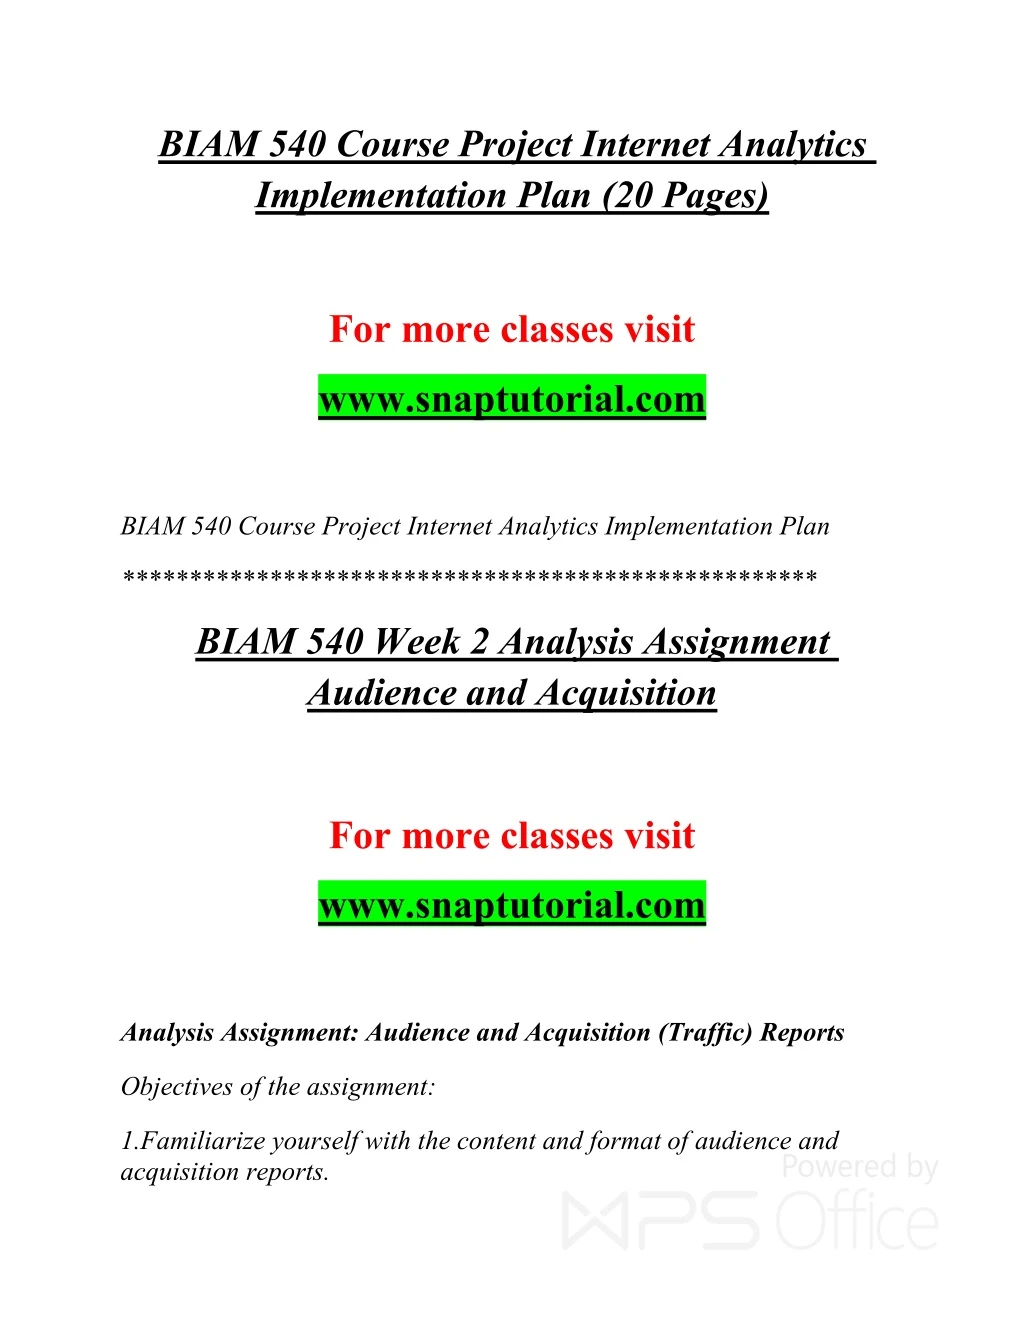 biam 540 course project internet analytics